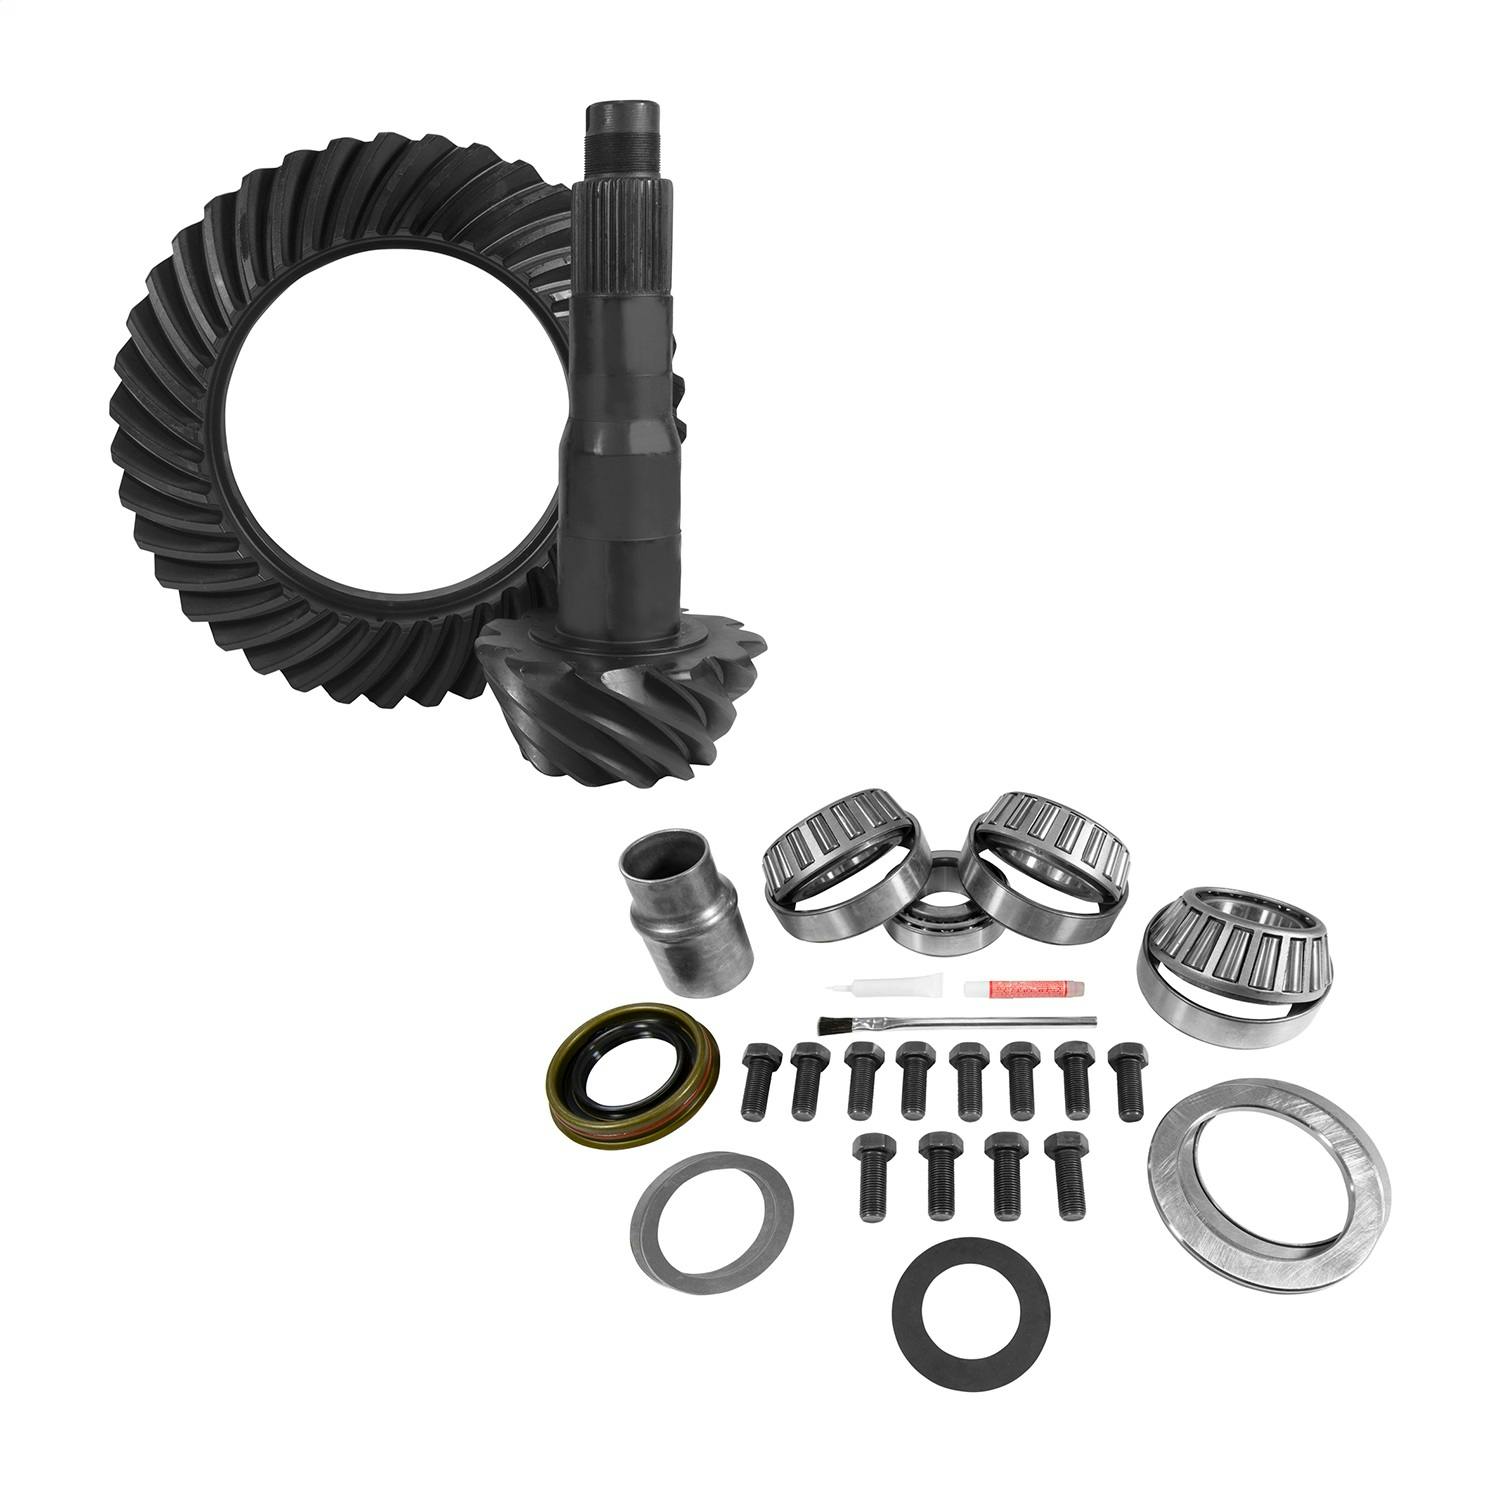 USA Standard Gear ZGK2148 10.5in. Ford 4.11 Rear Ring/Pinion and Install Kit